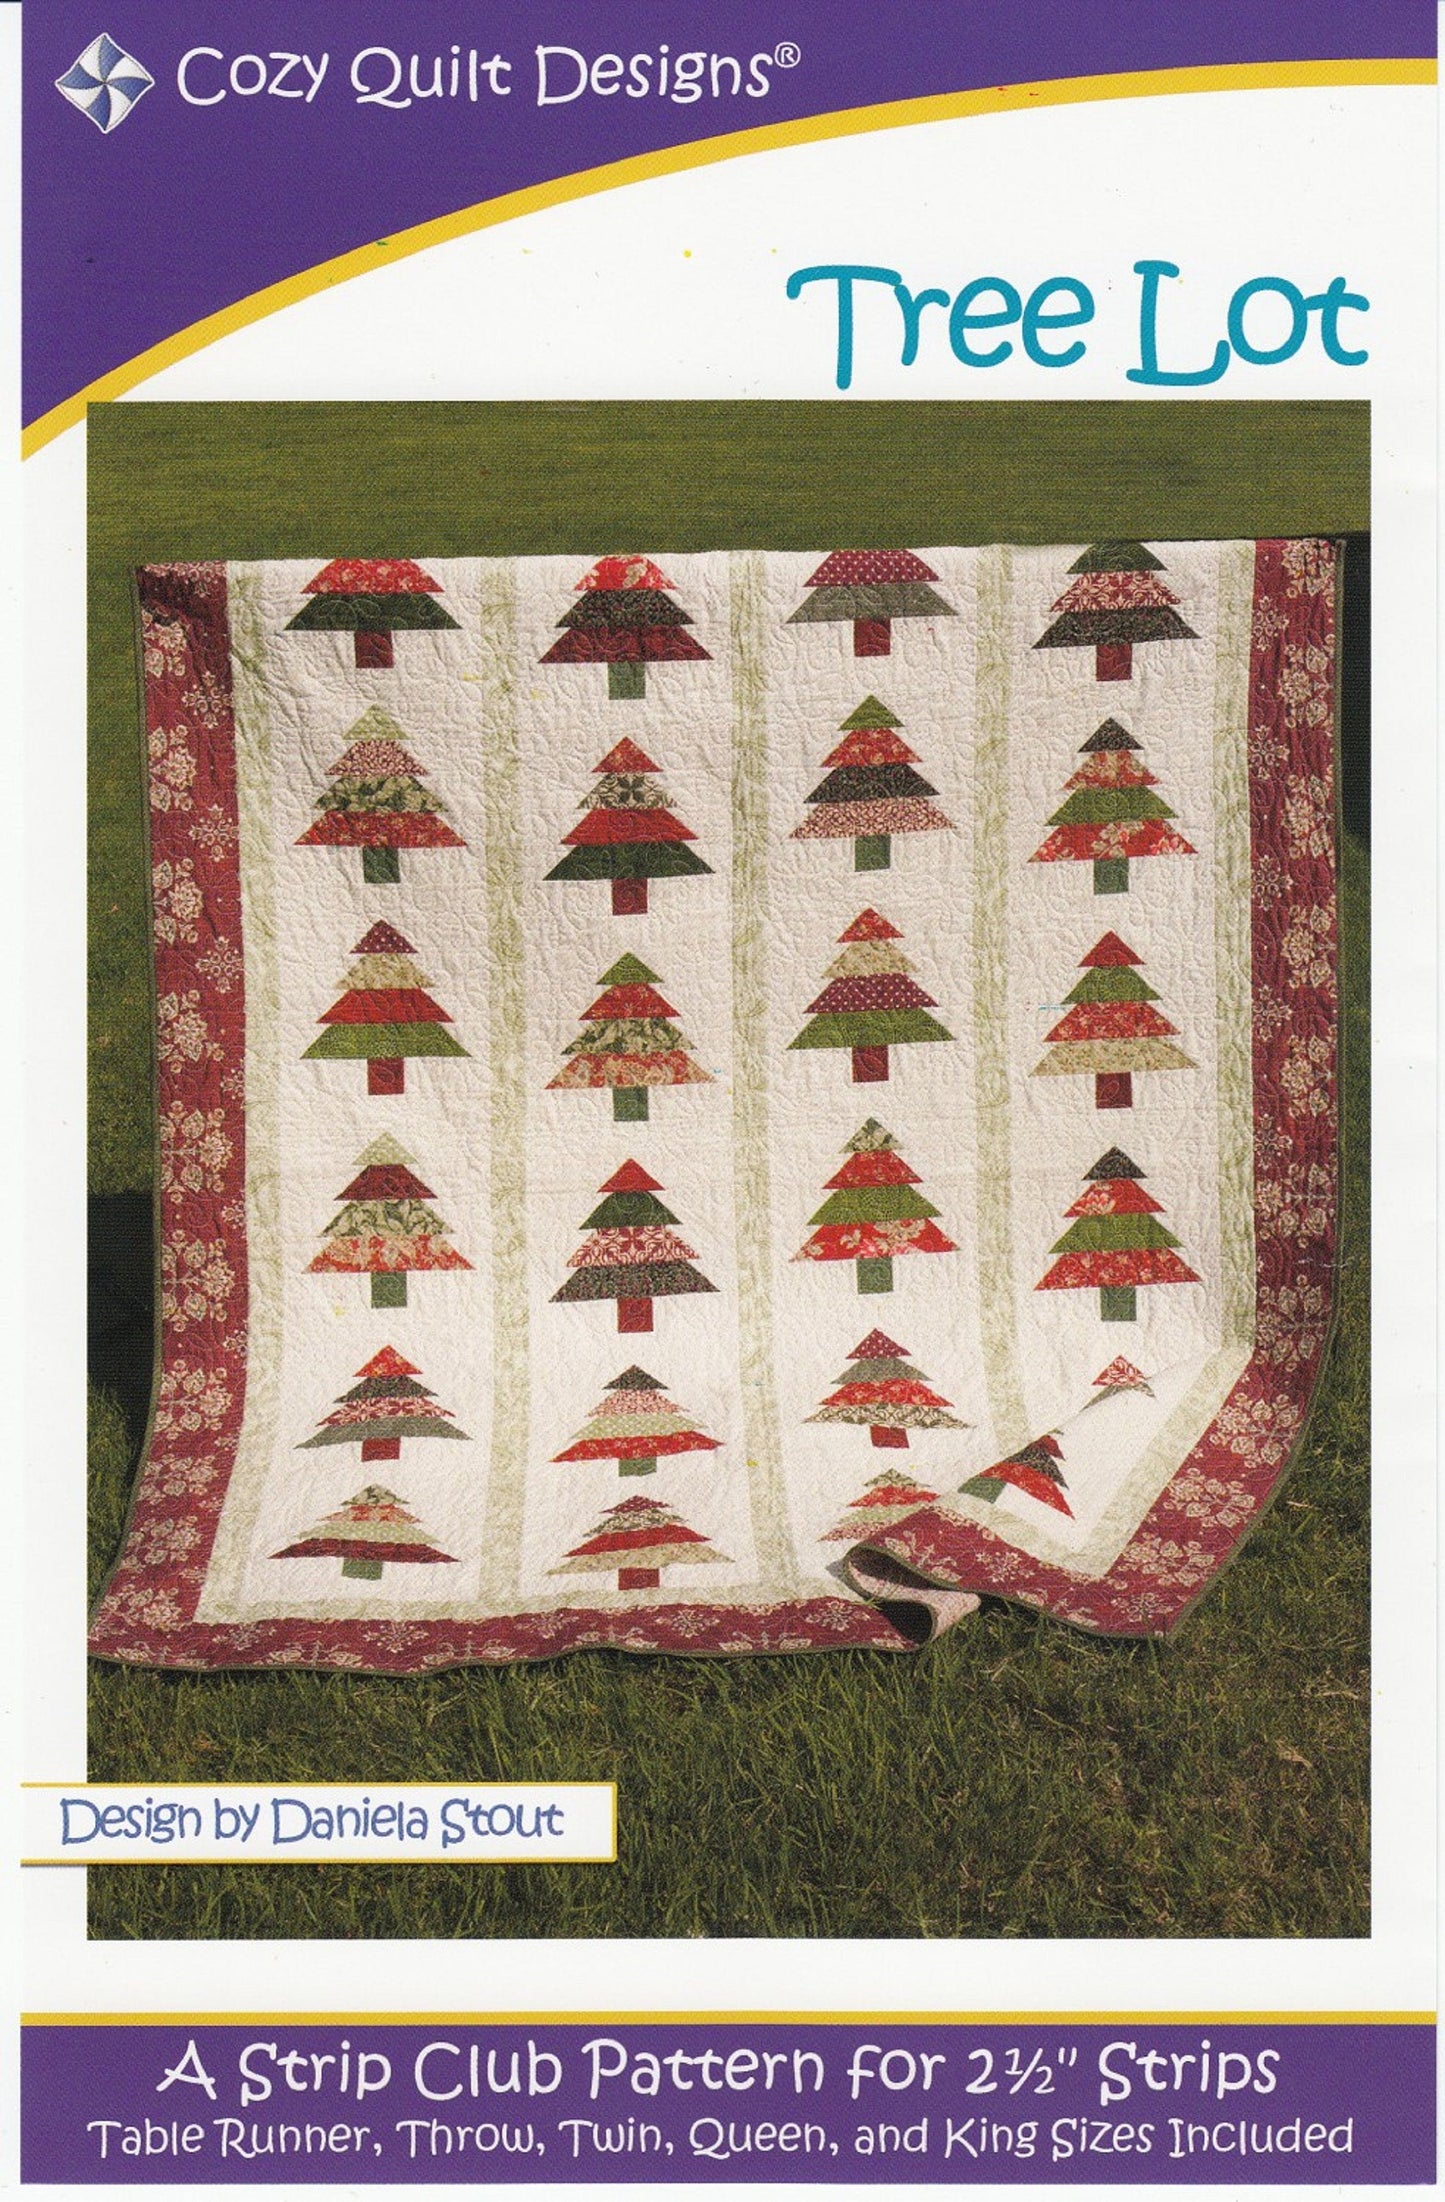 Tree Lot Quilt Pattern by Cozy Quilt Designs